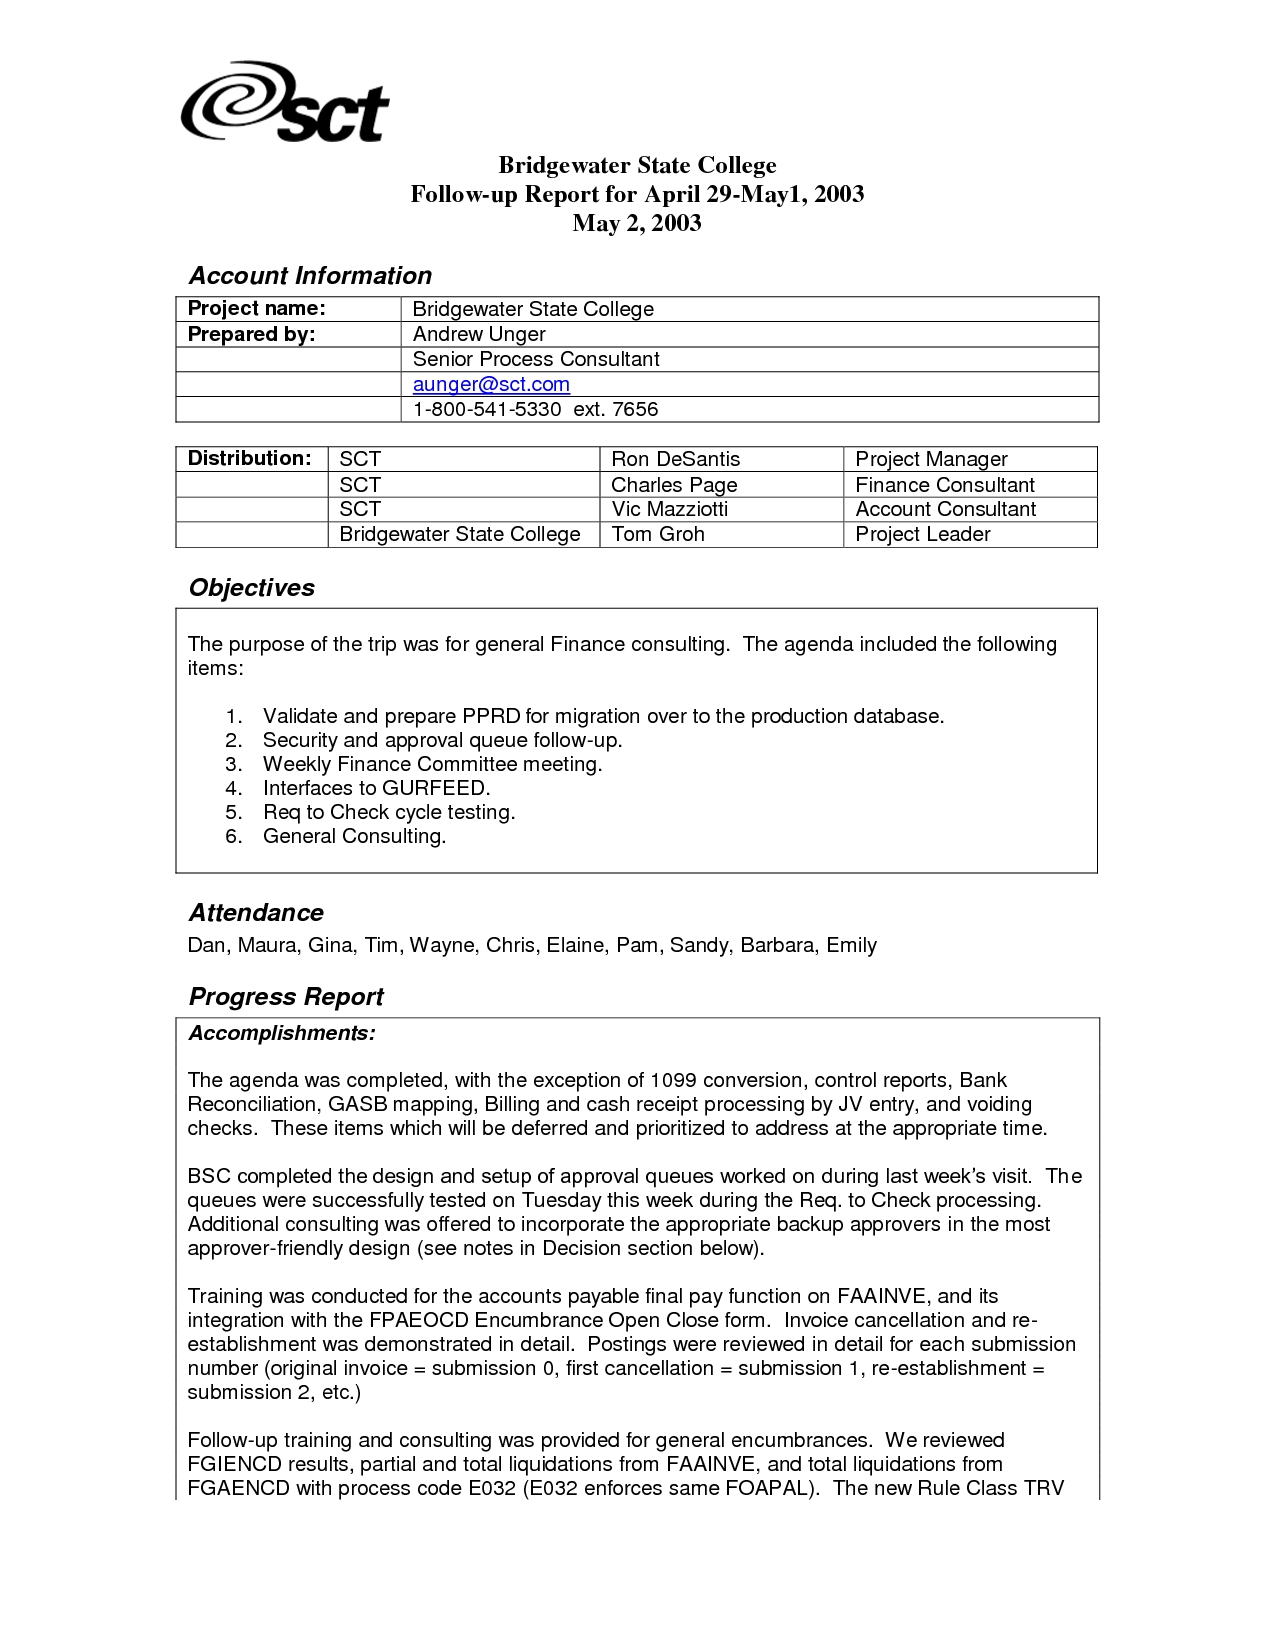 Customer Visit Report Format Templates For Customer Visit Report Format Templates